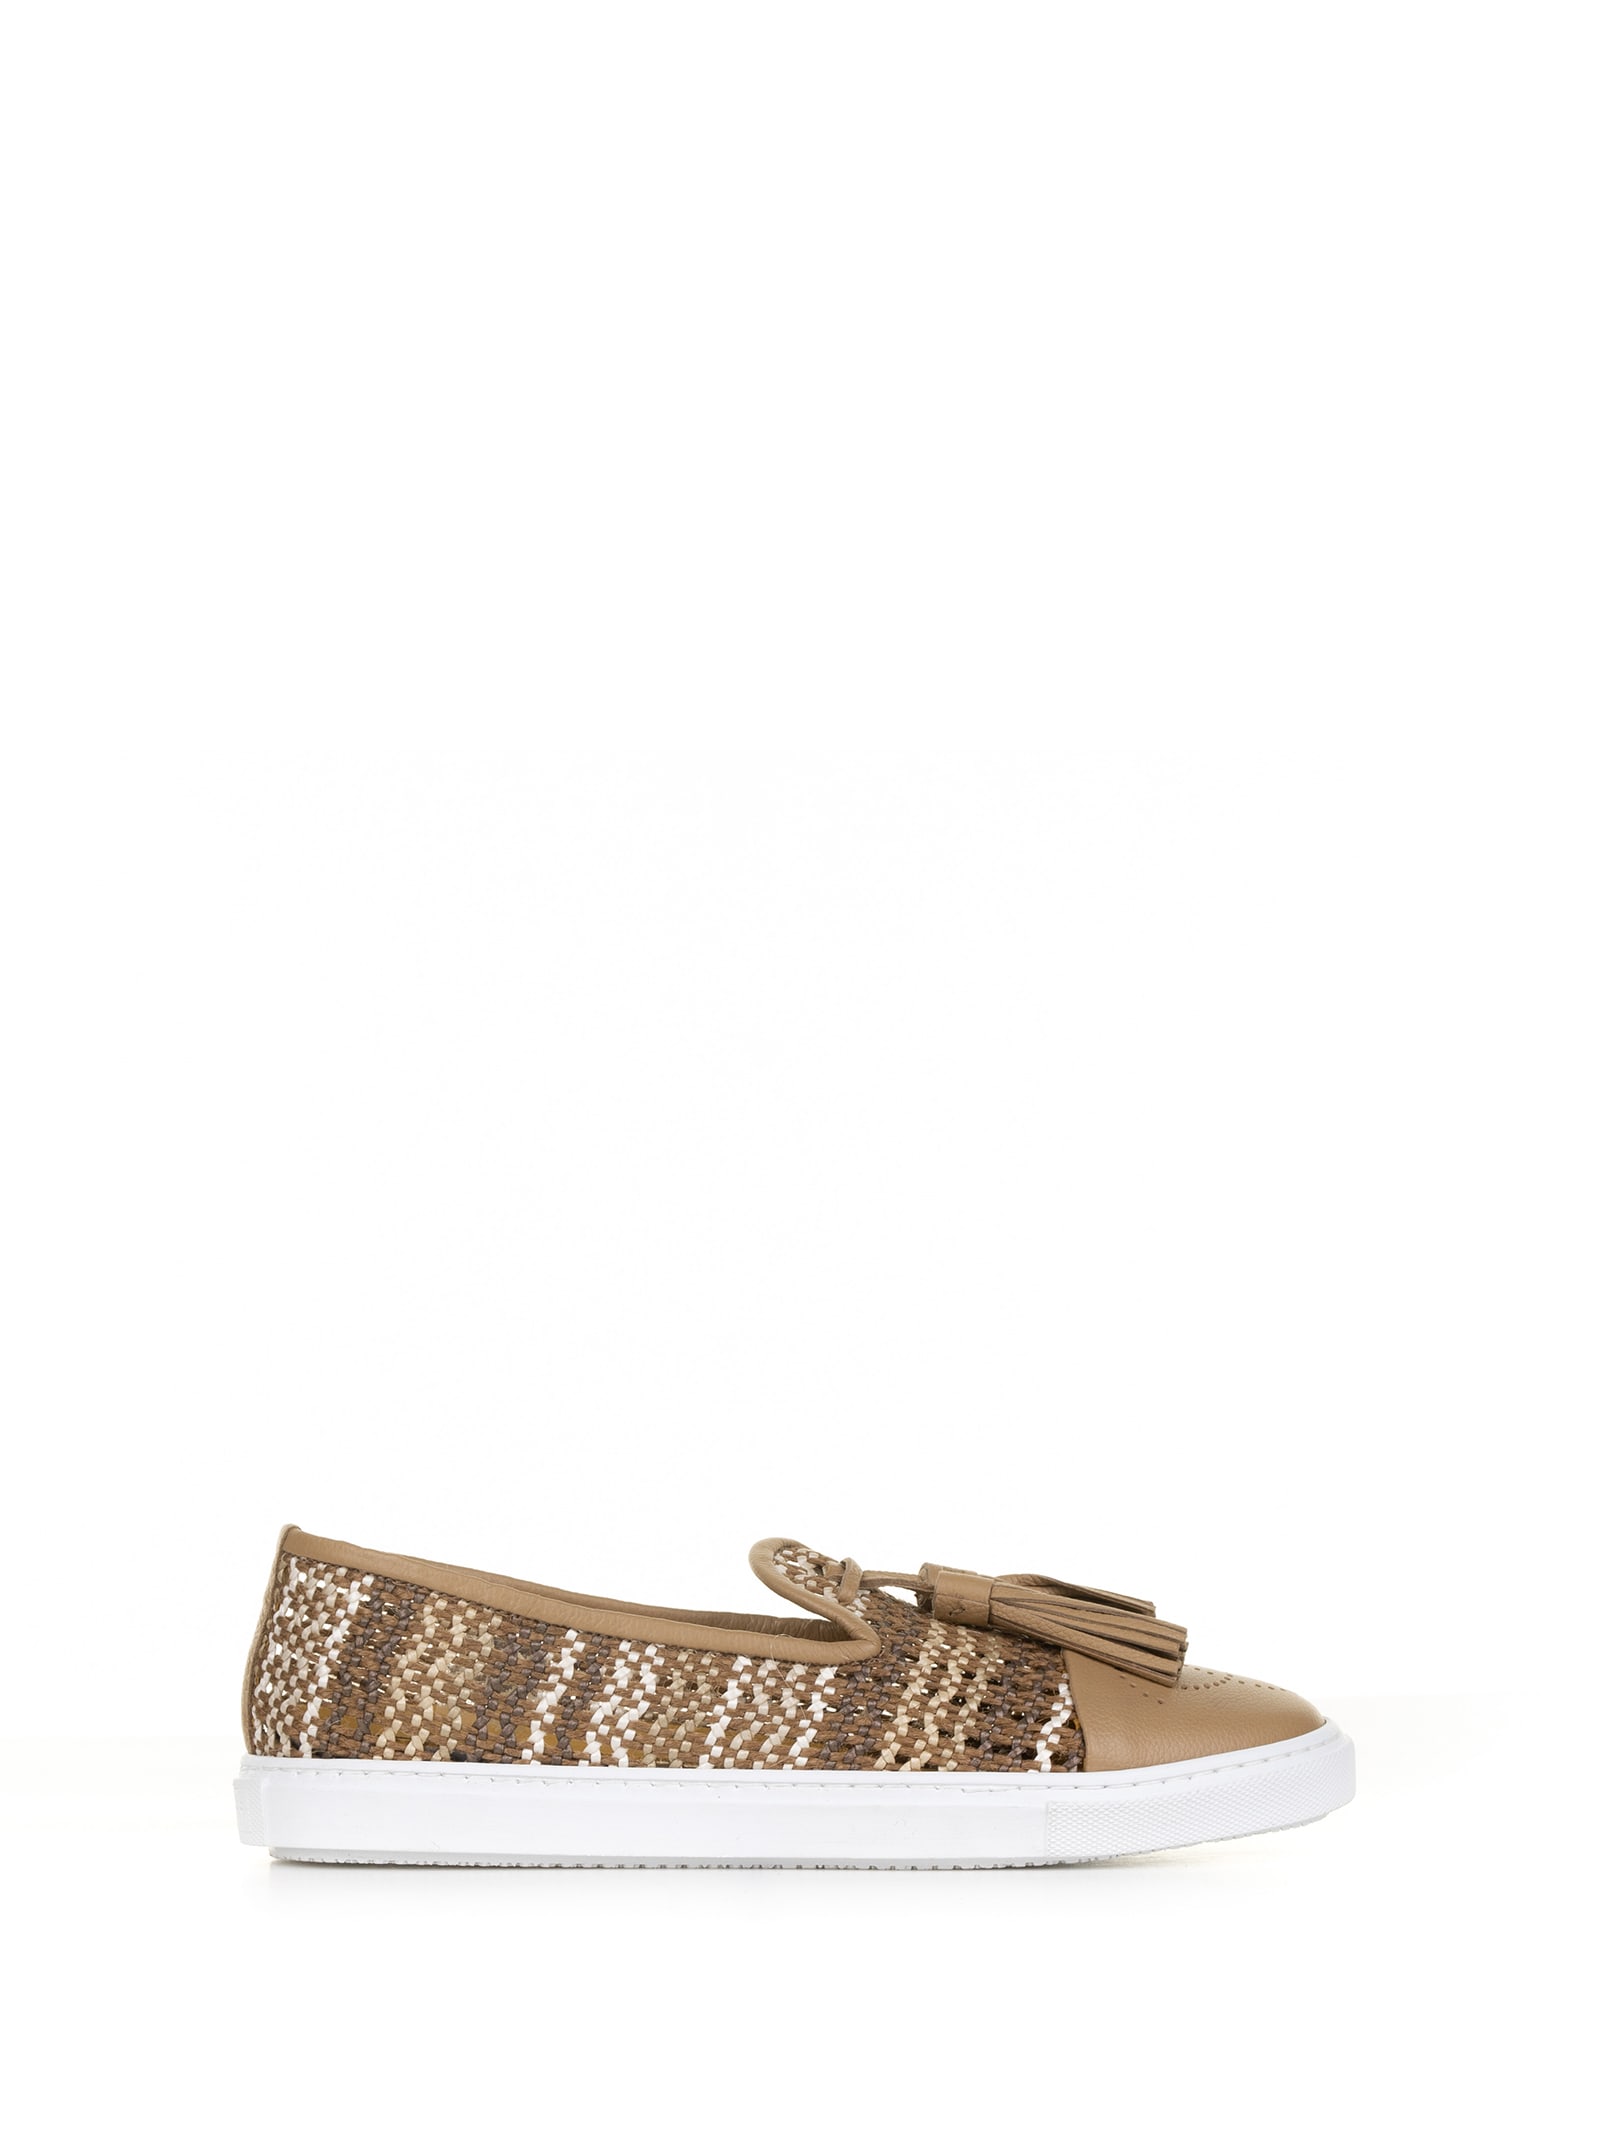 Slip-ons In Woven Leather With Tassels